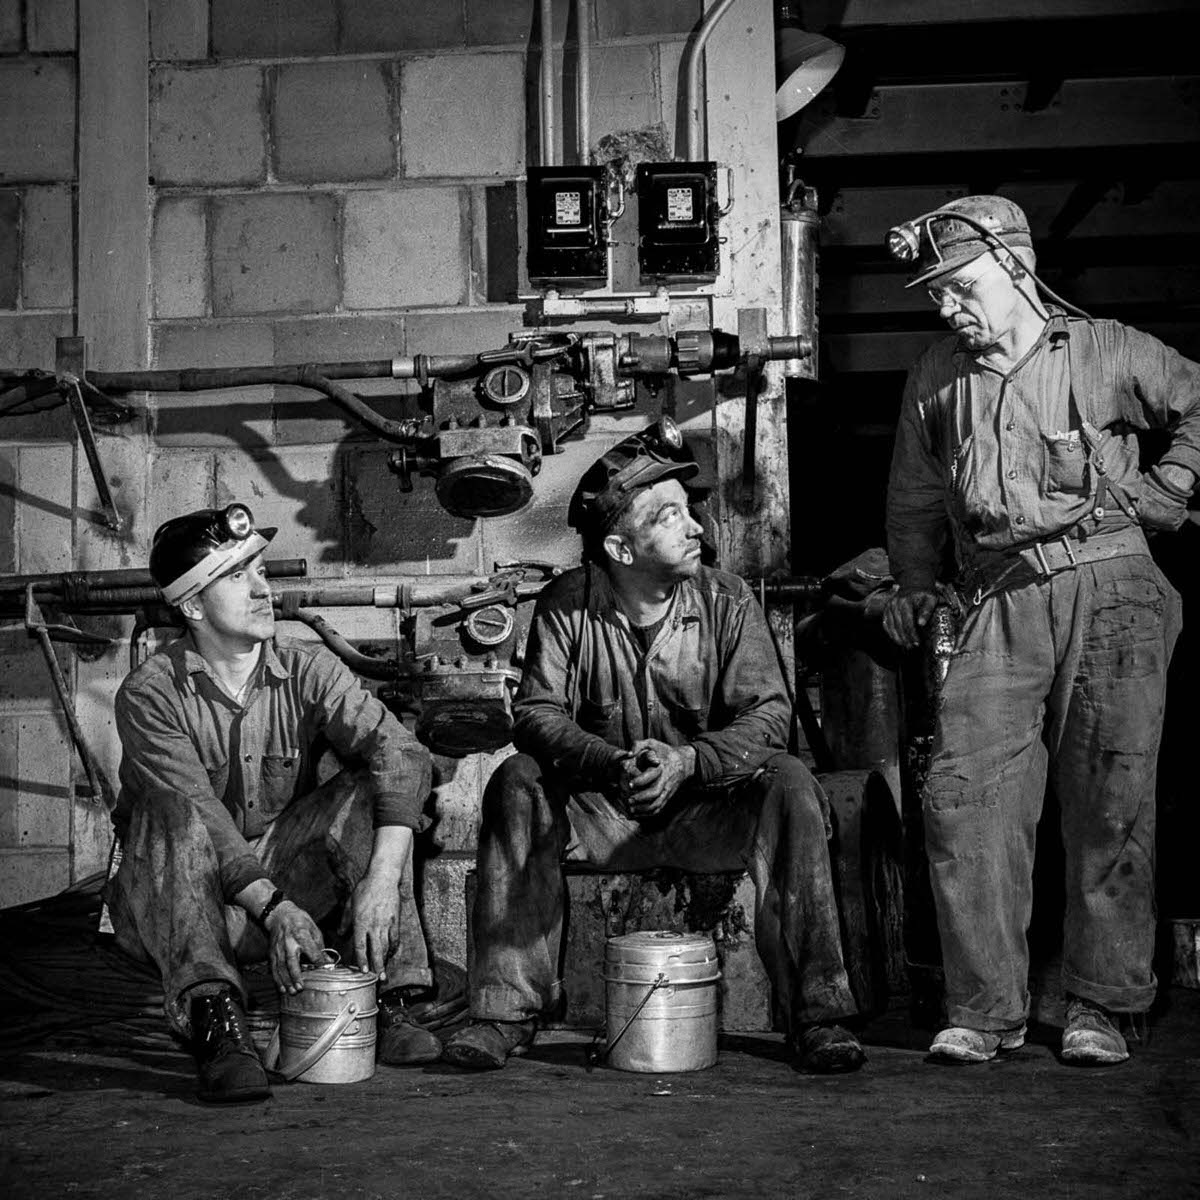 Miners break for lunch in the machine shop.